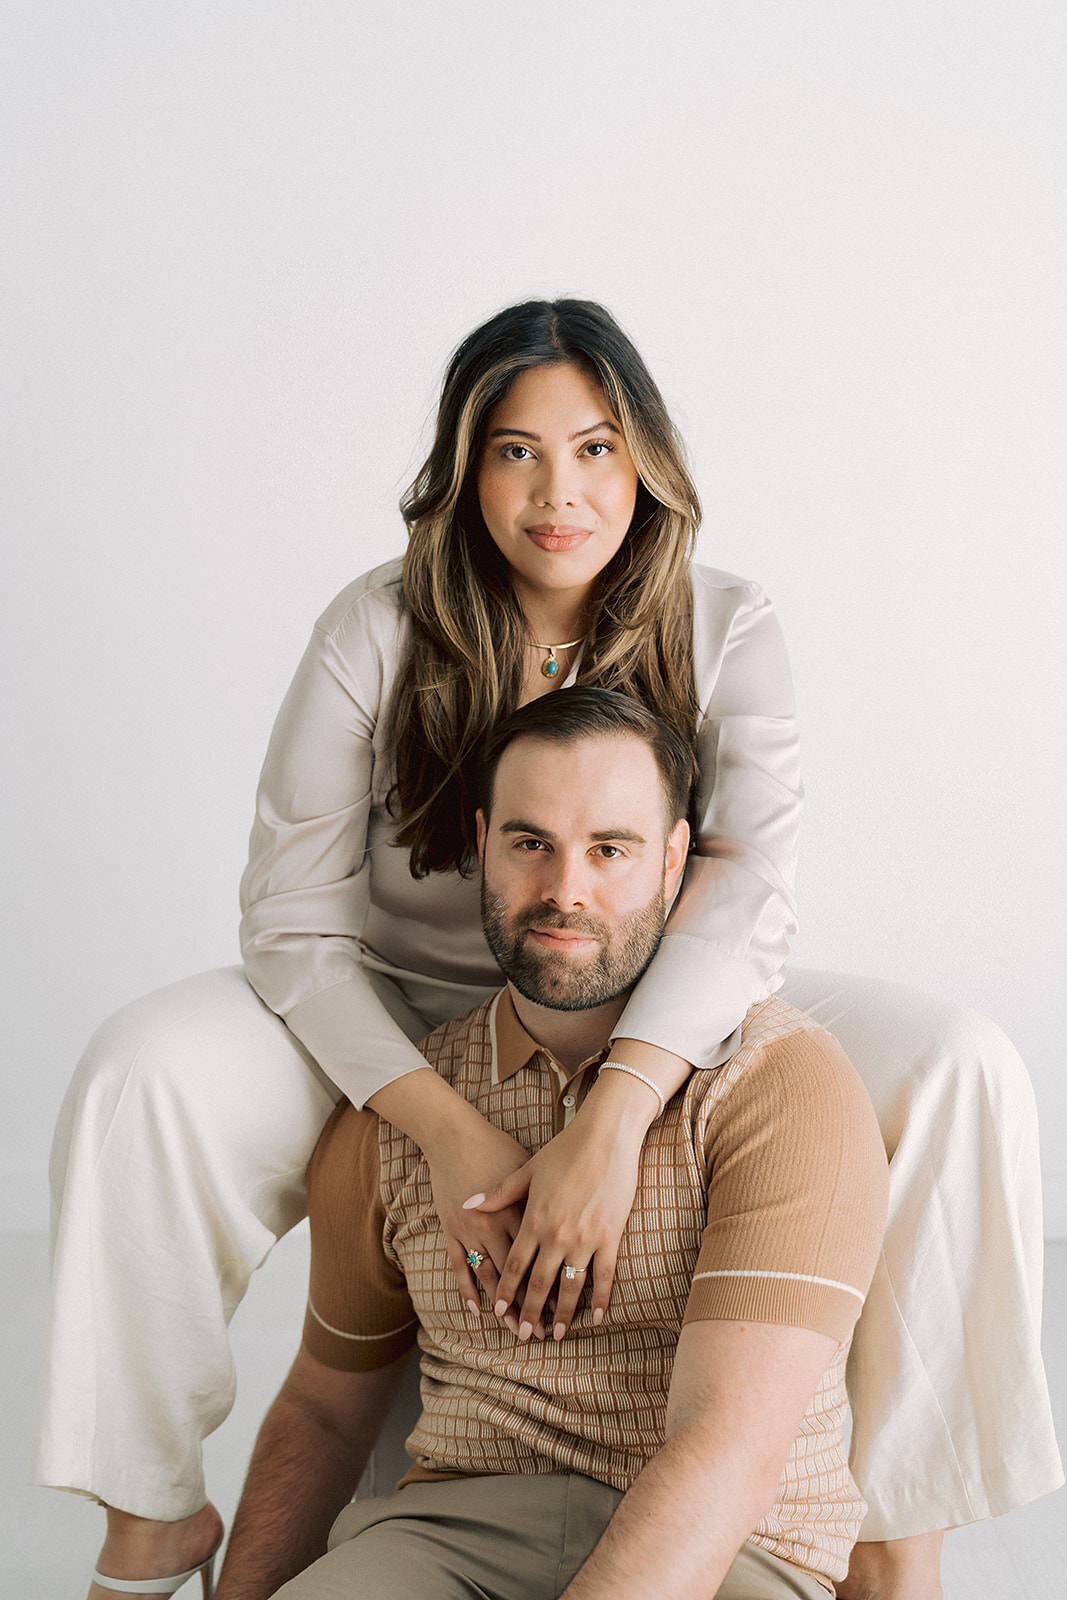 A man sits between his fiance's legs as they pose together for an engagement photo